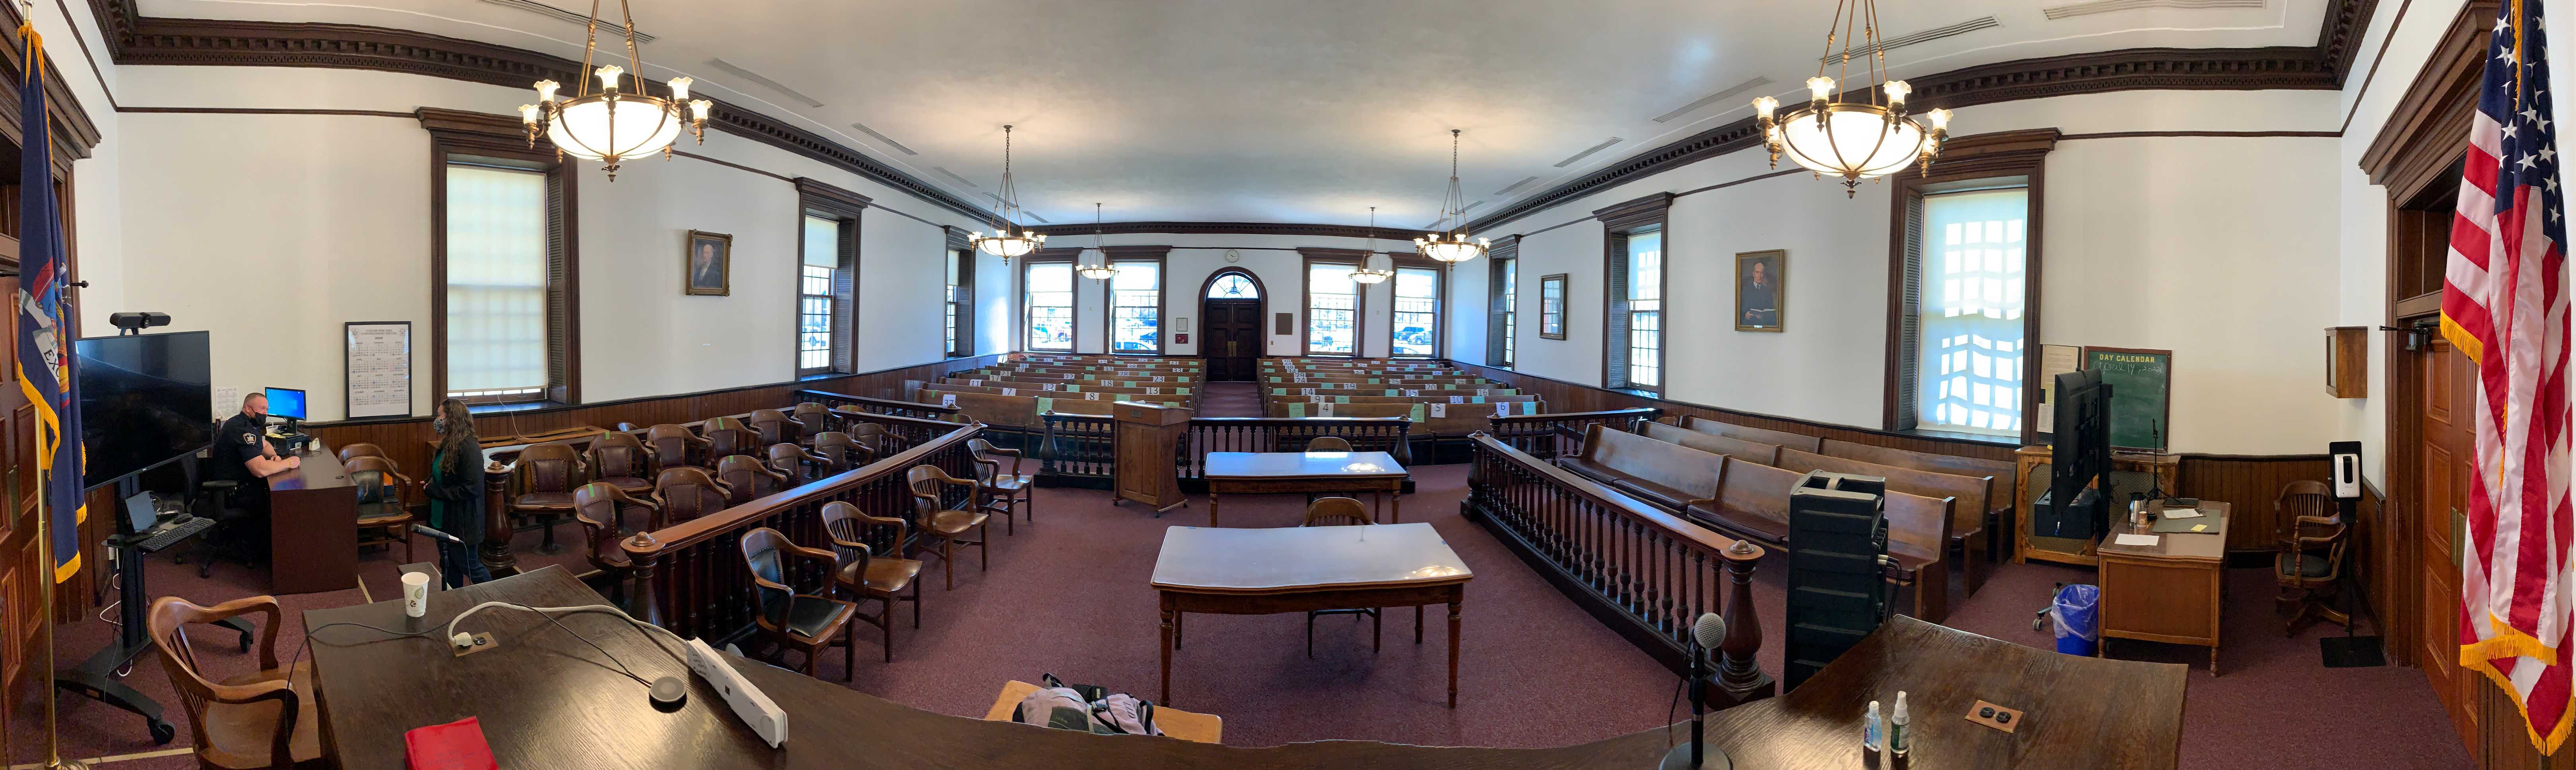 An old-fashioned courtroom with wooden furniture has been modernized with two large TV screens and CPUs on rollable stands (one computer is connected to a videoconferencing camera), a speaker, and microphones. The panorama is taken from the viewpoint of the judge's bench, facing the gallery.